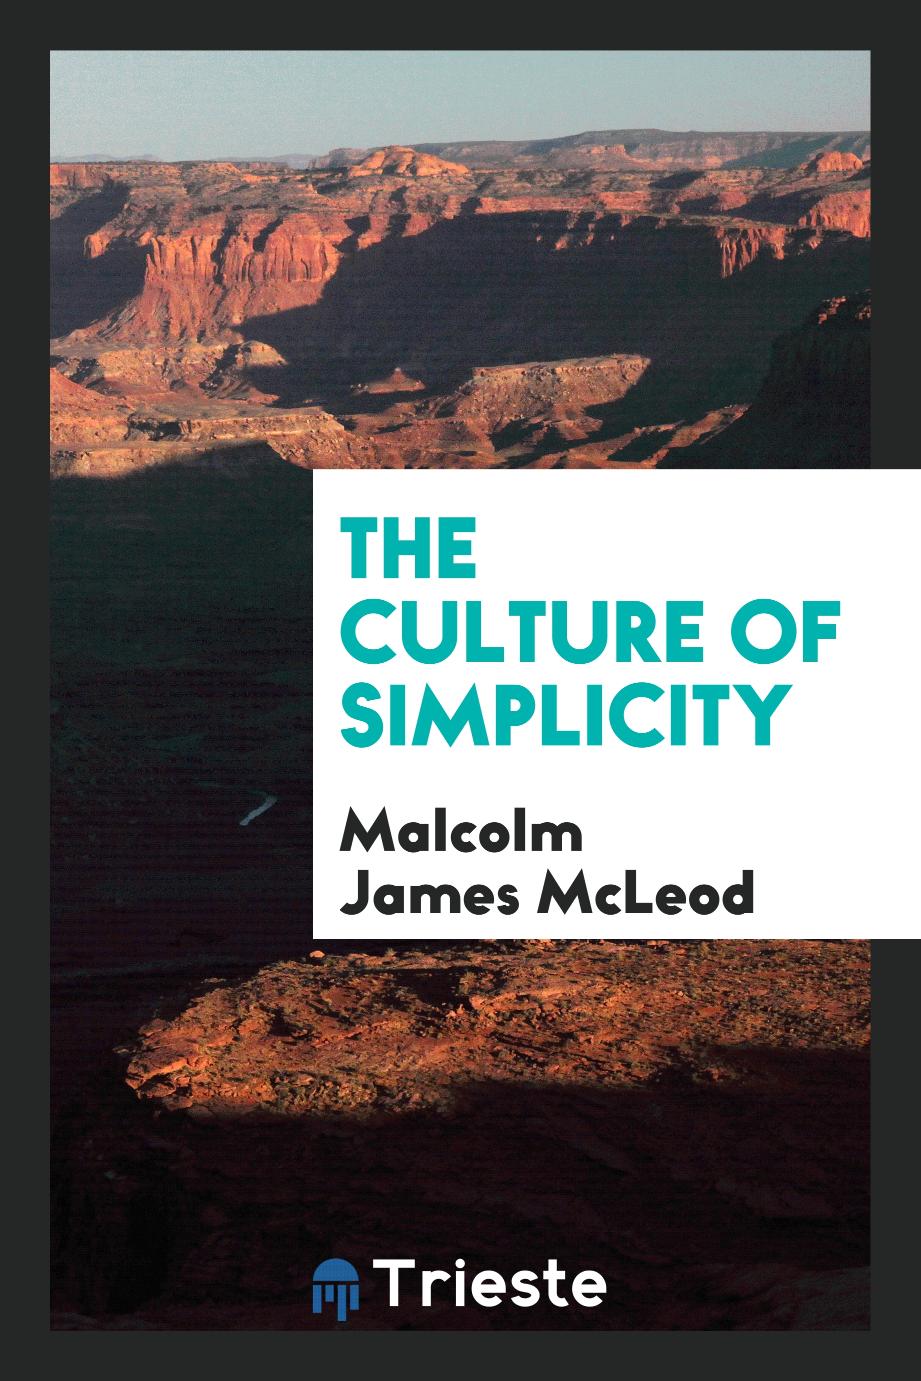 The culture of simplicity